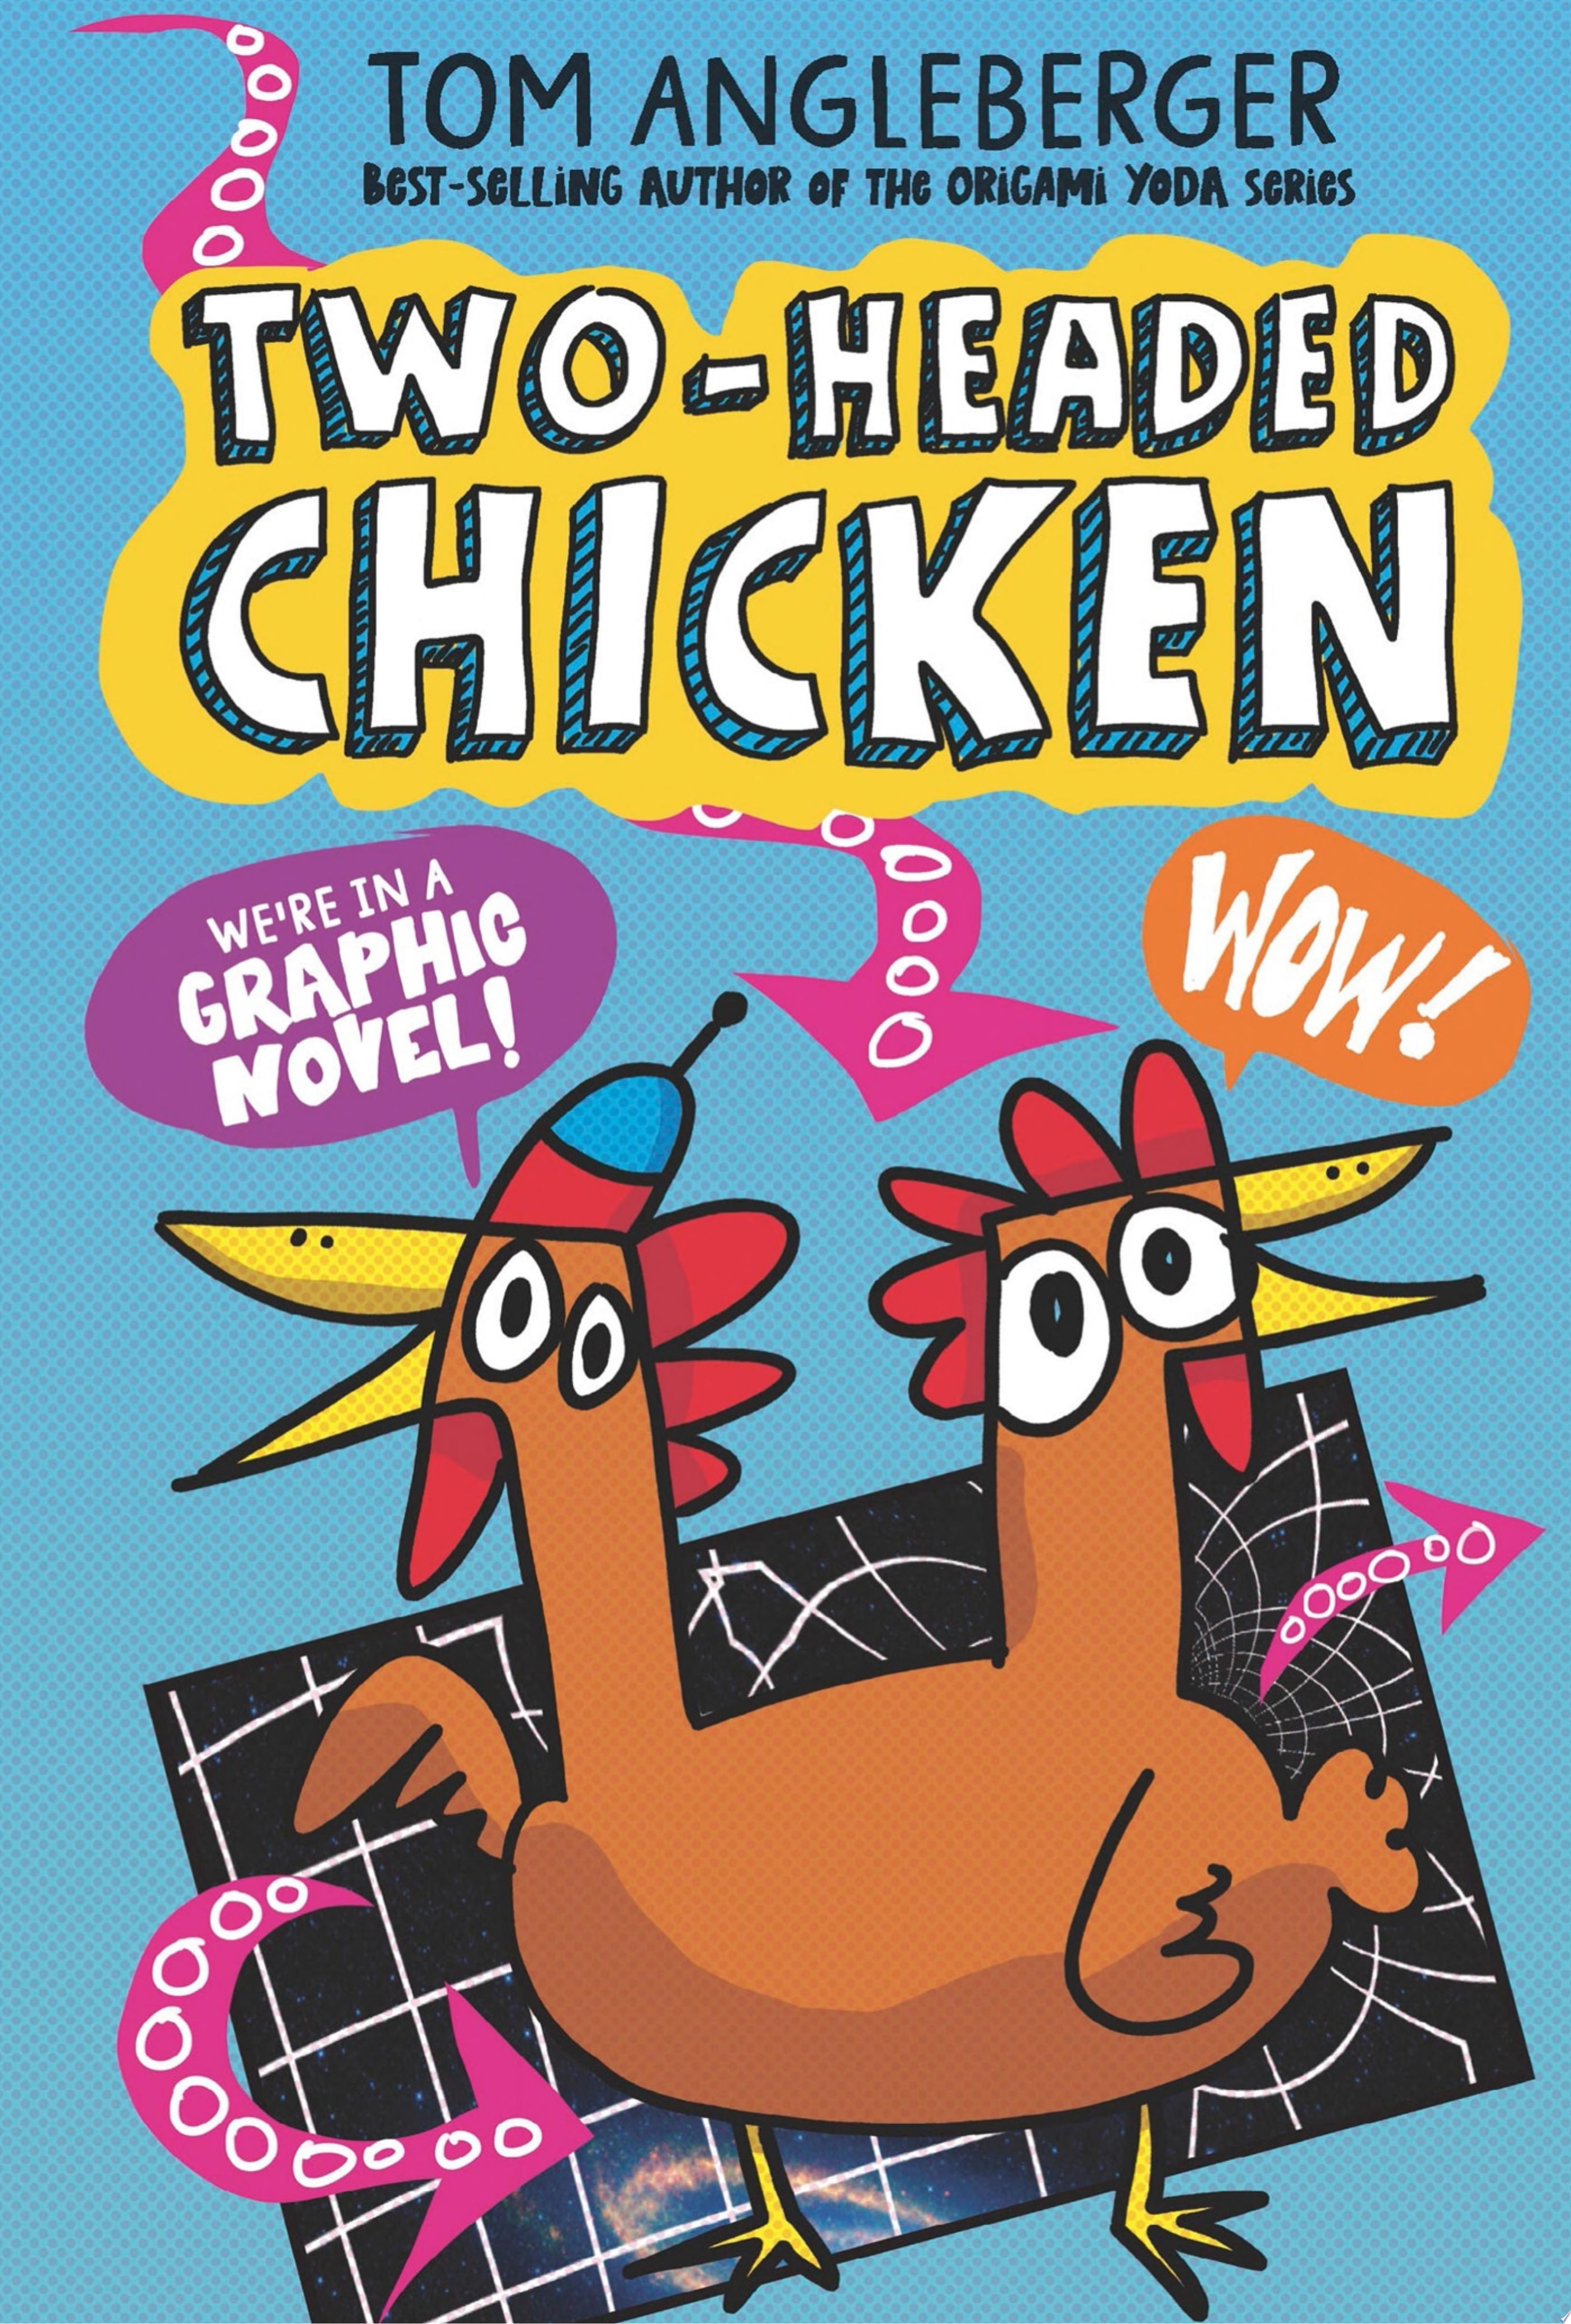 Image for "Two-Headed Chicken"